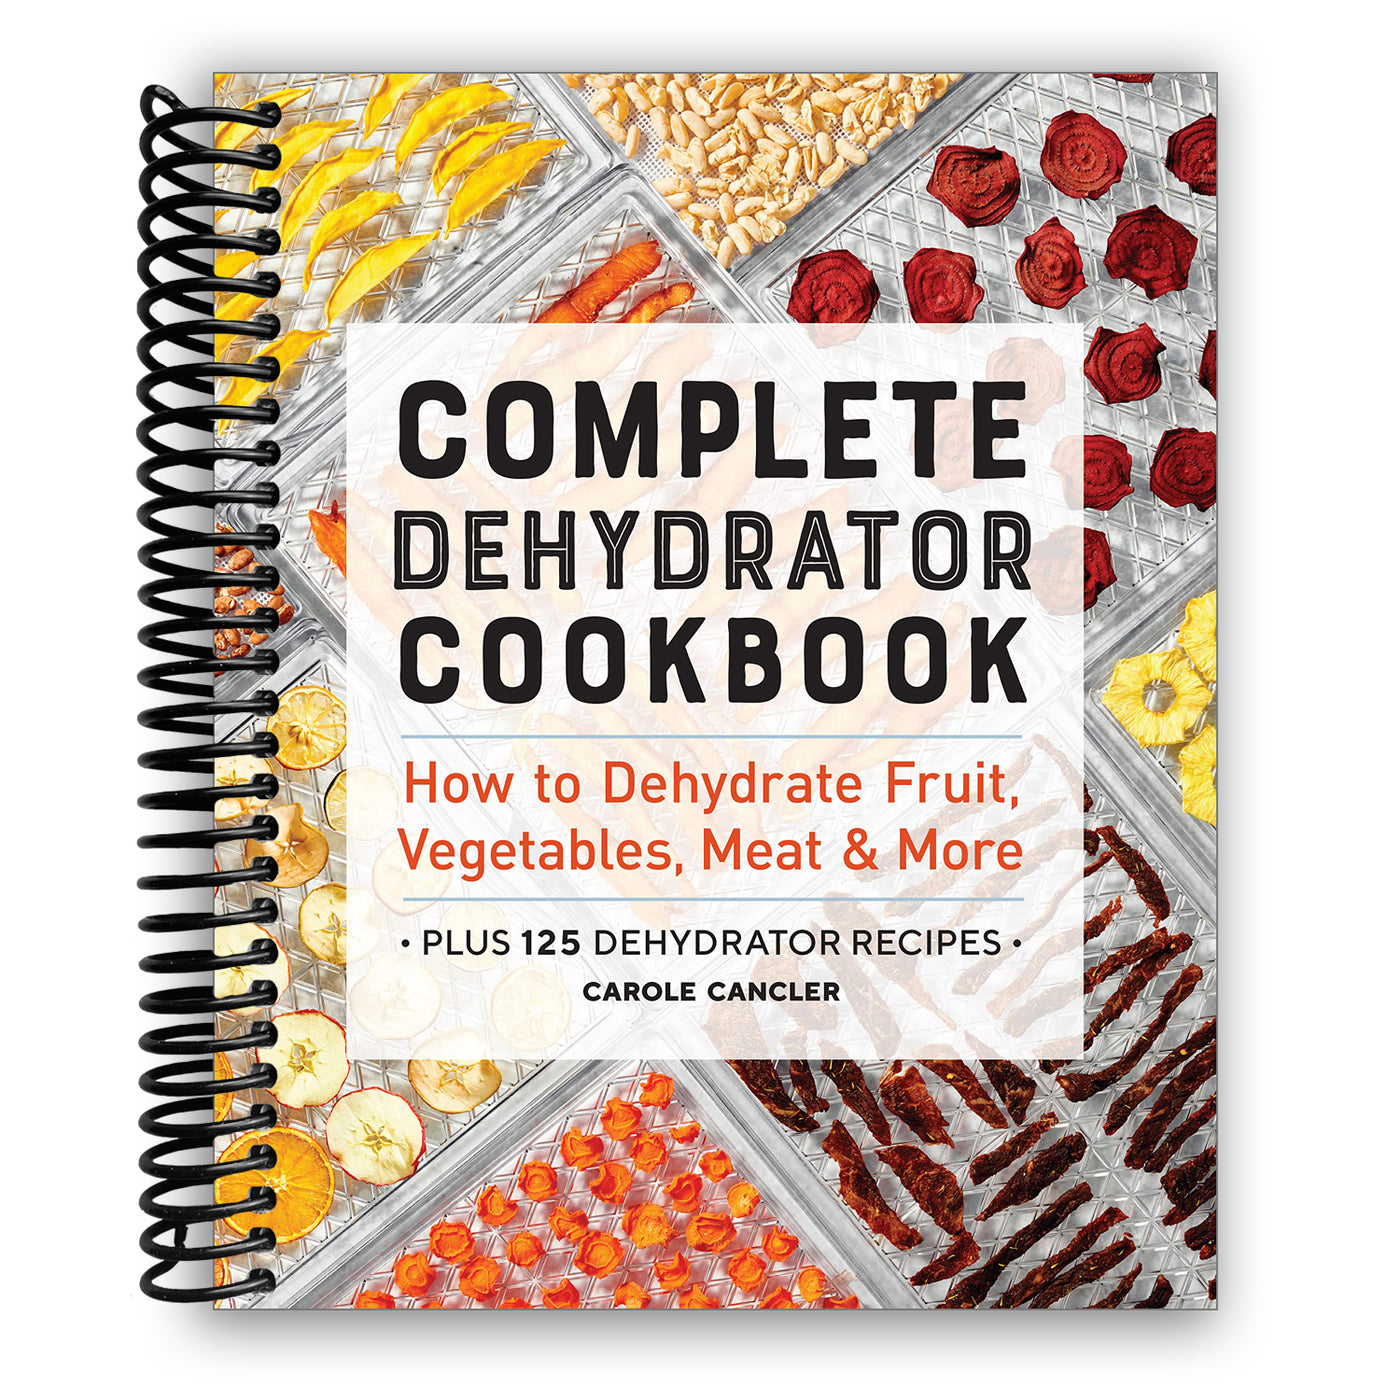 Complete Dehydrator Cookbook: How to Dehydrate Fruit, Vegetables, Meat & More (Spiral Bound)